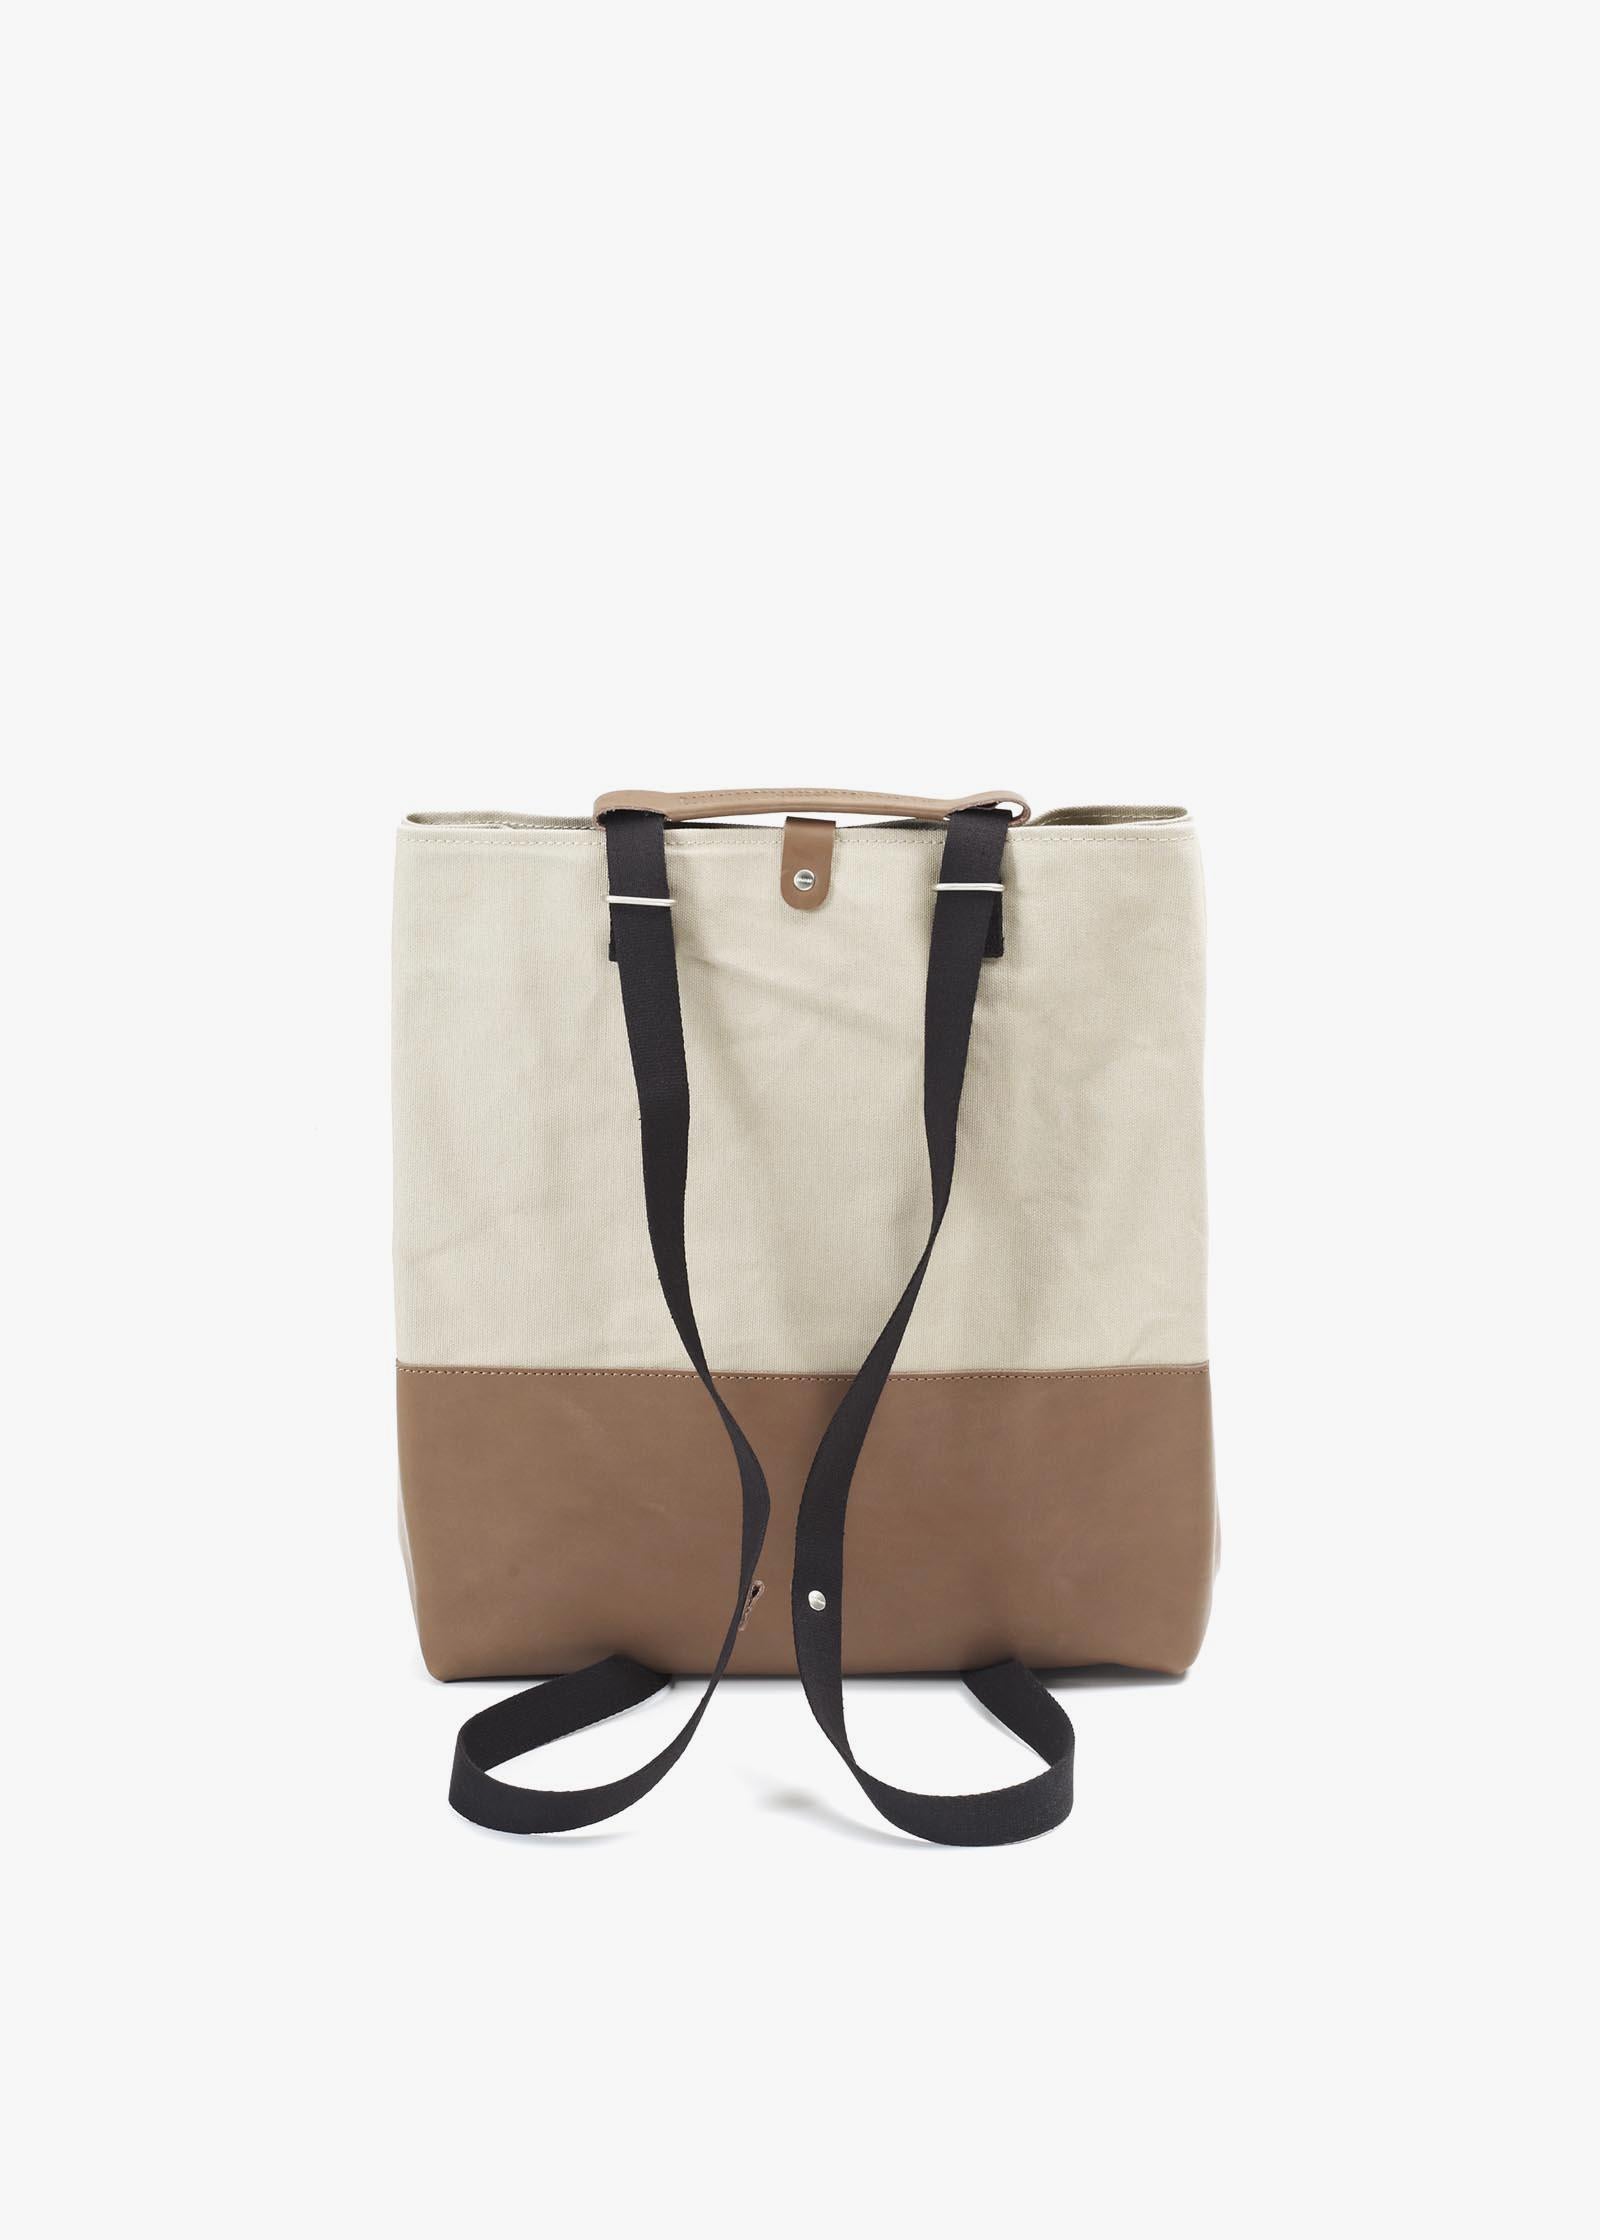 Shopper – Brown Leather Canvas